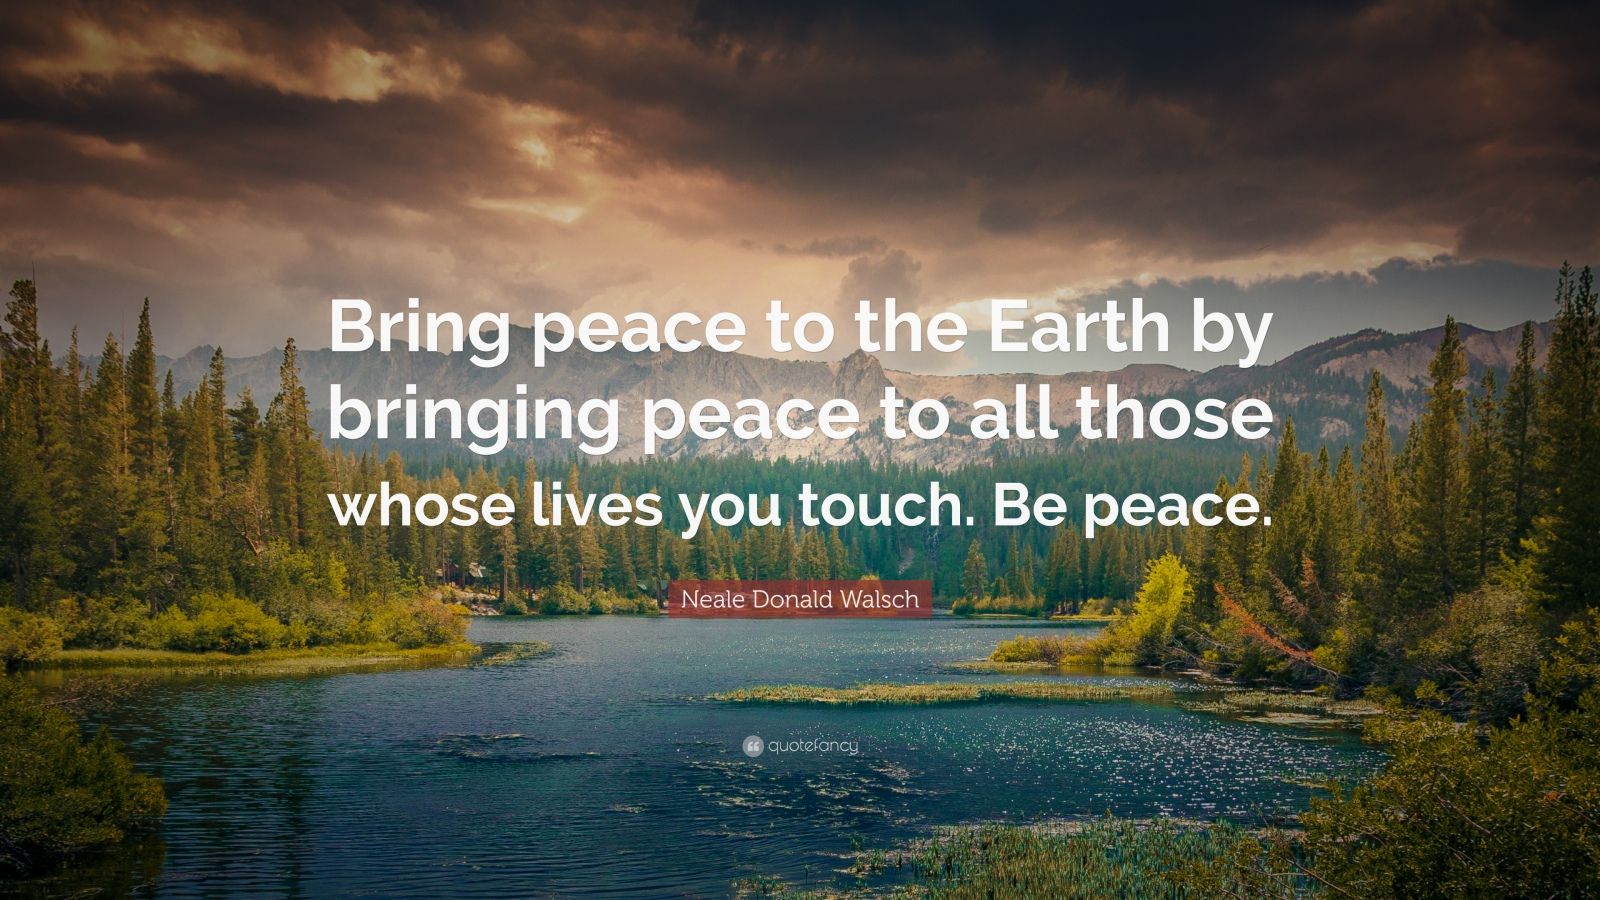 Neale Donald Walsch Quote: “Bring peace to the Earth by bringing peace ...